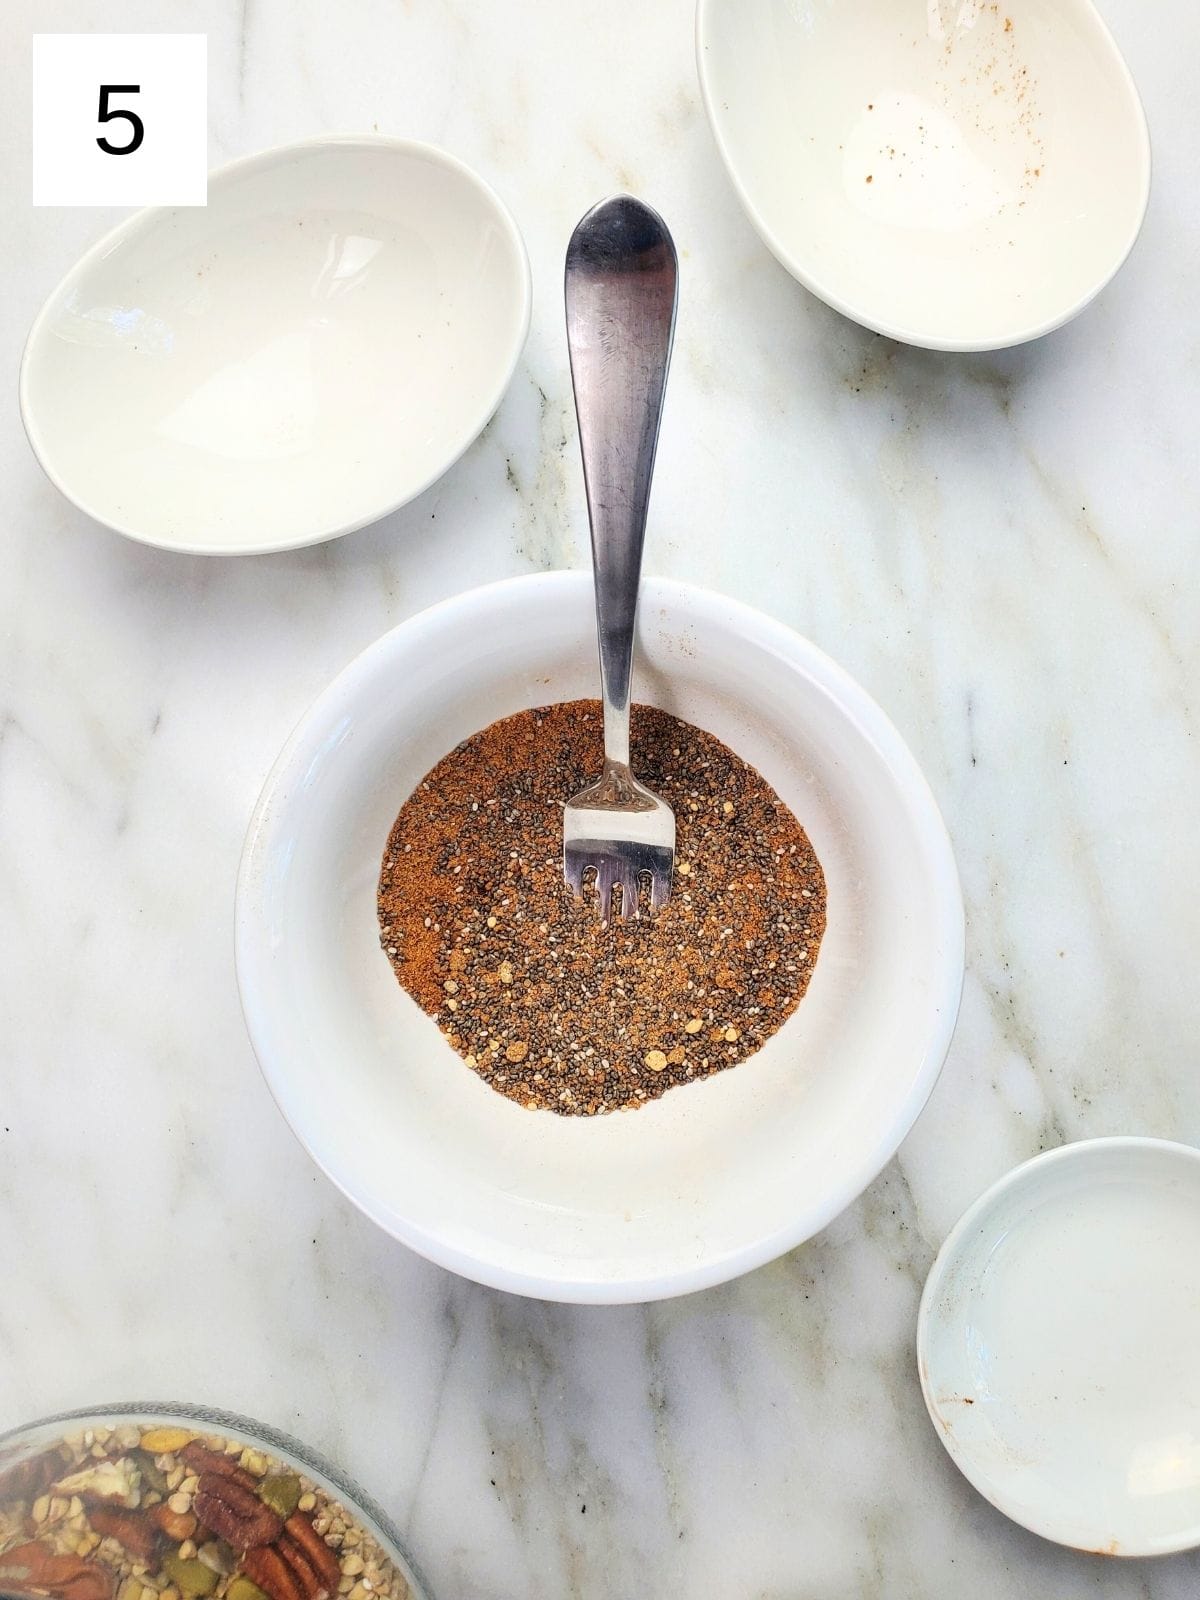 Chia seeds, vanilla powder, cinnamon, cardamom, and ginger powder being mixed with a fork.